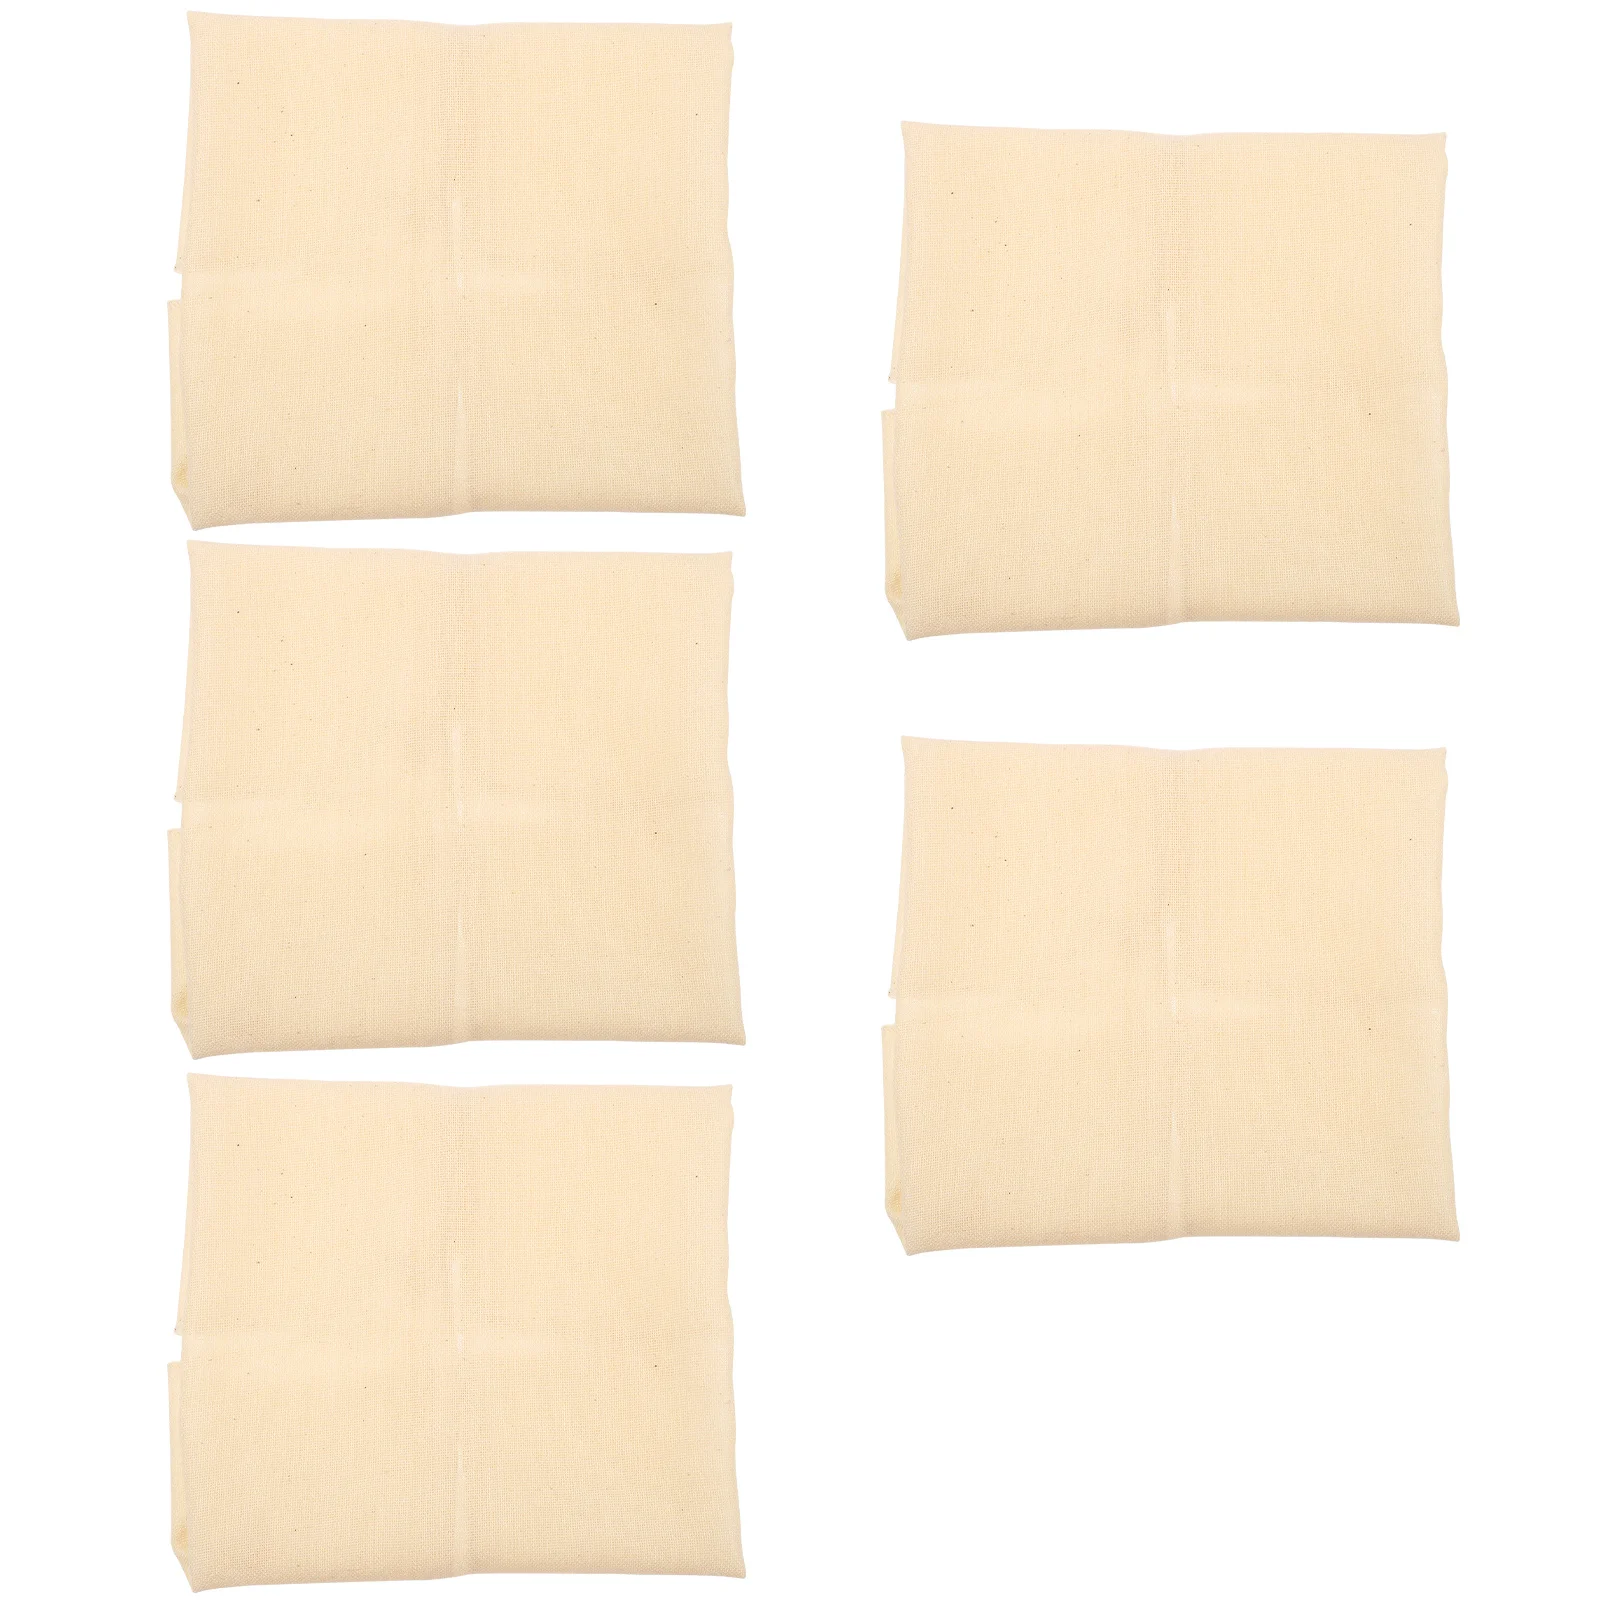 

5 Pcs Steamer Clothes Cotton Cheesecloth Butter Molds Cheesecloth Straining Organic Cheese Steamer Mat Liners Milk Tofu Cloth